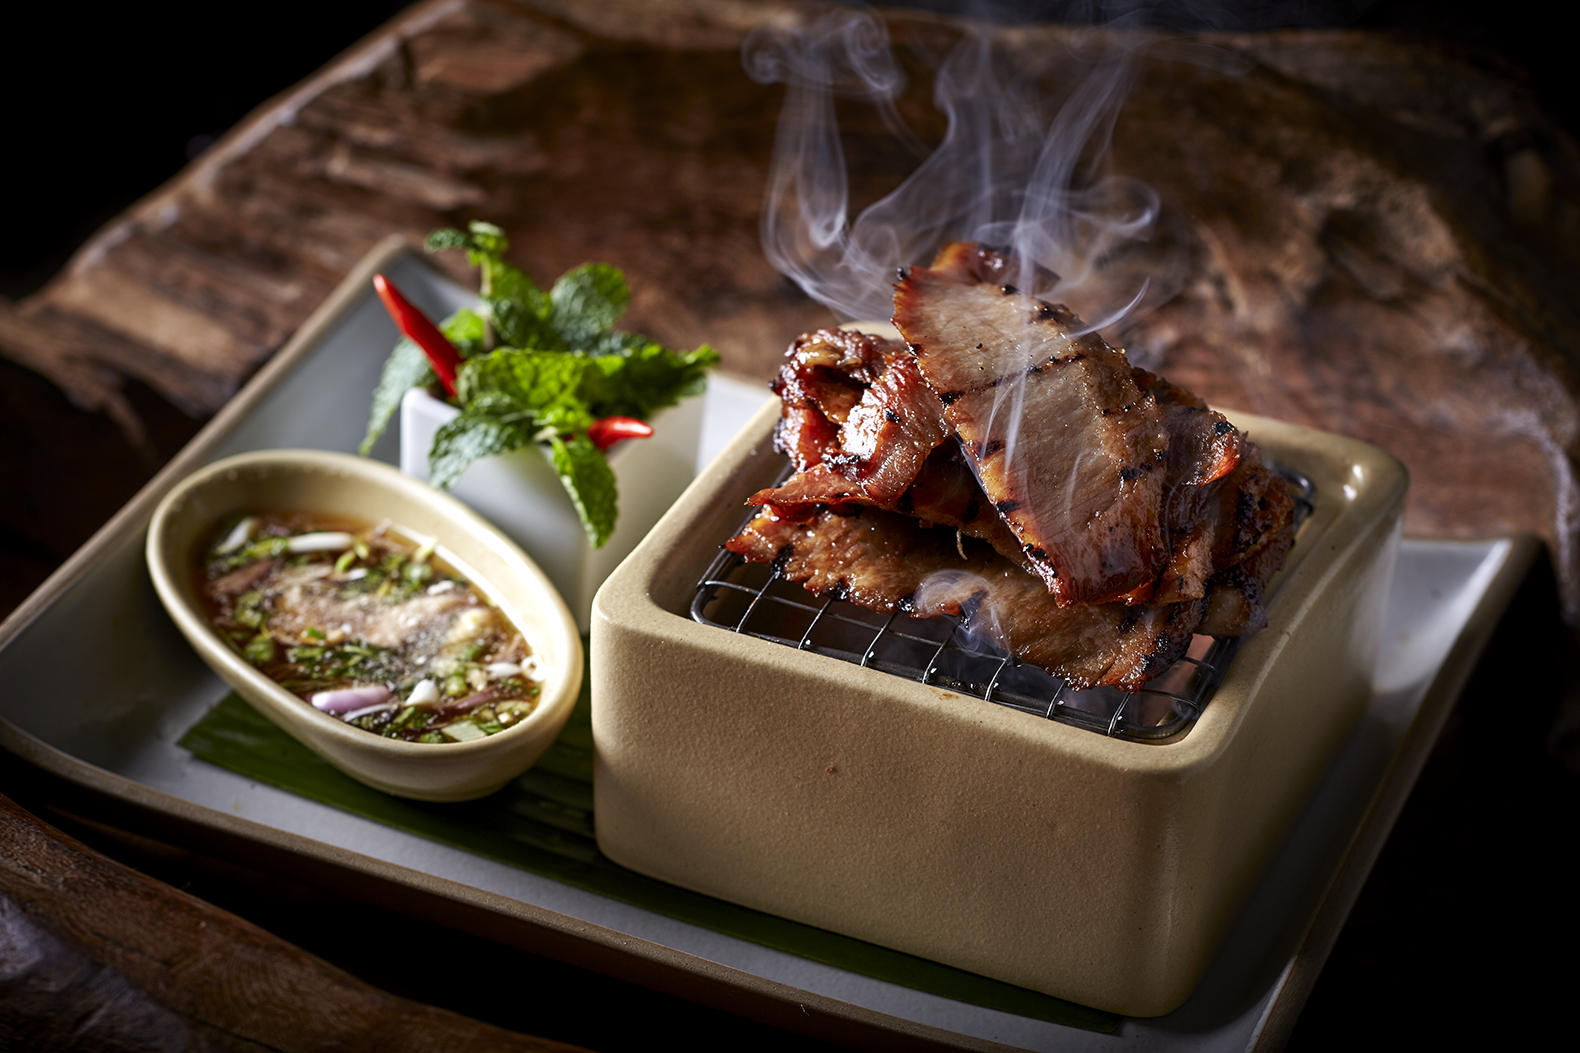 Grilled pork neck, served on a mini grill, comes with a flavoursome sauce.